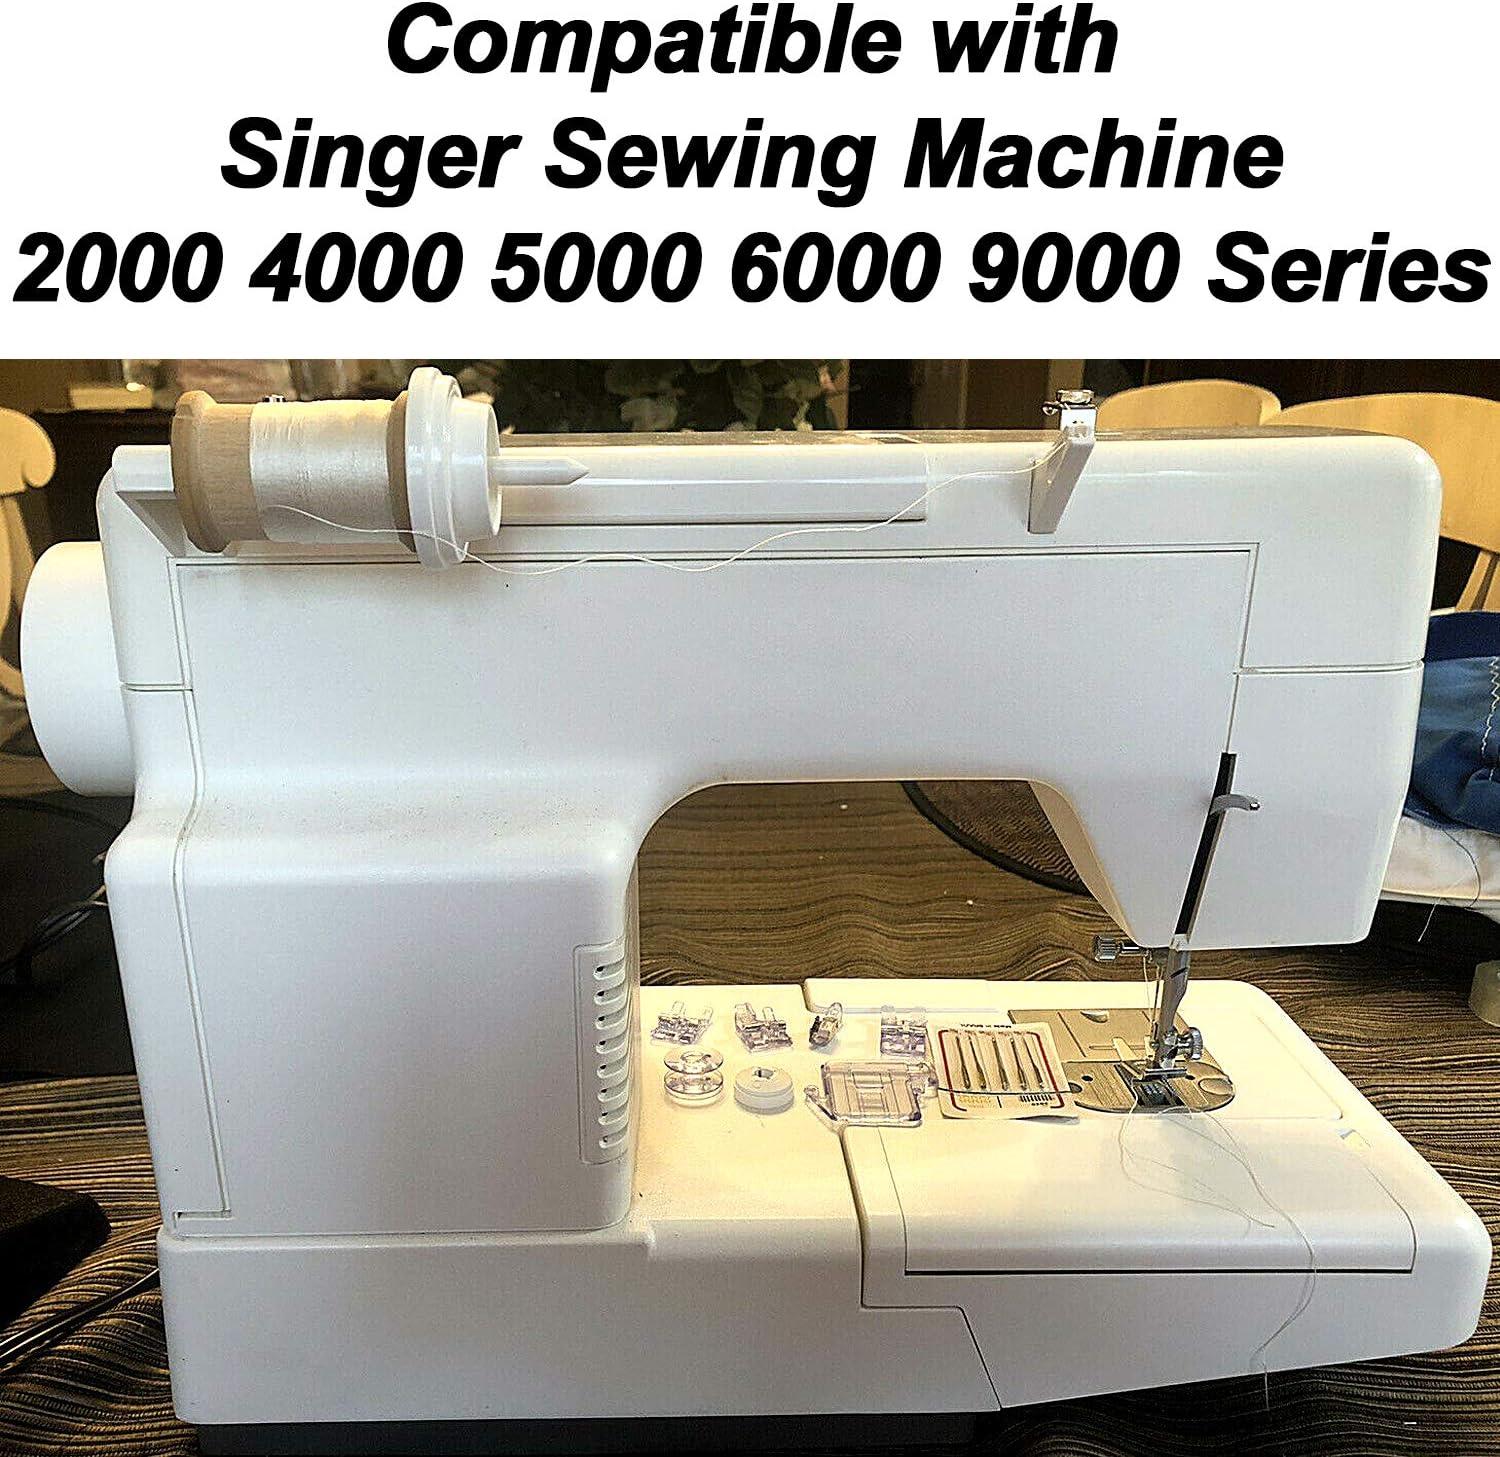 Inserting/ Adding top thread to Singer 5825C sewing machine 